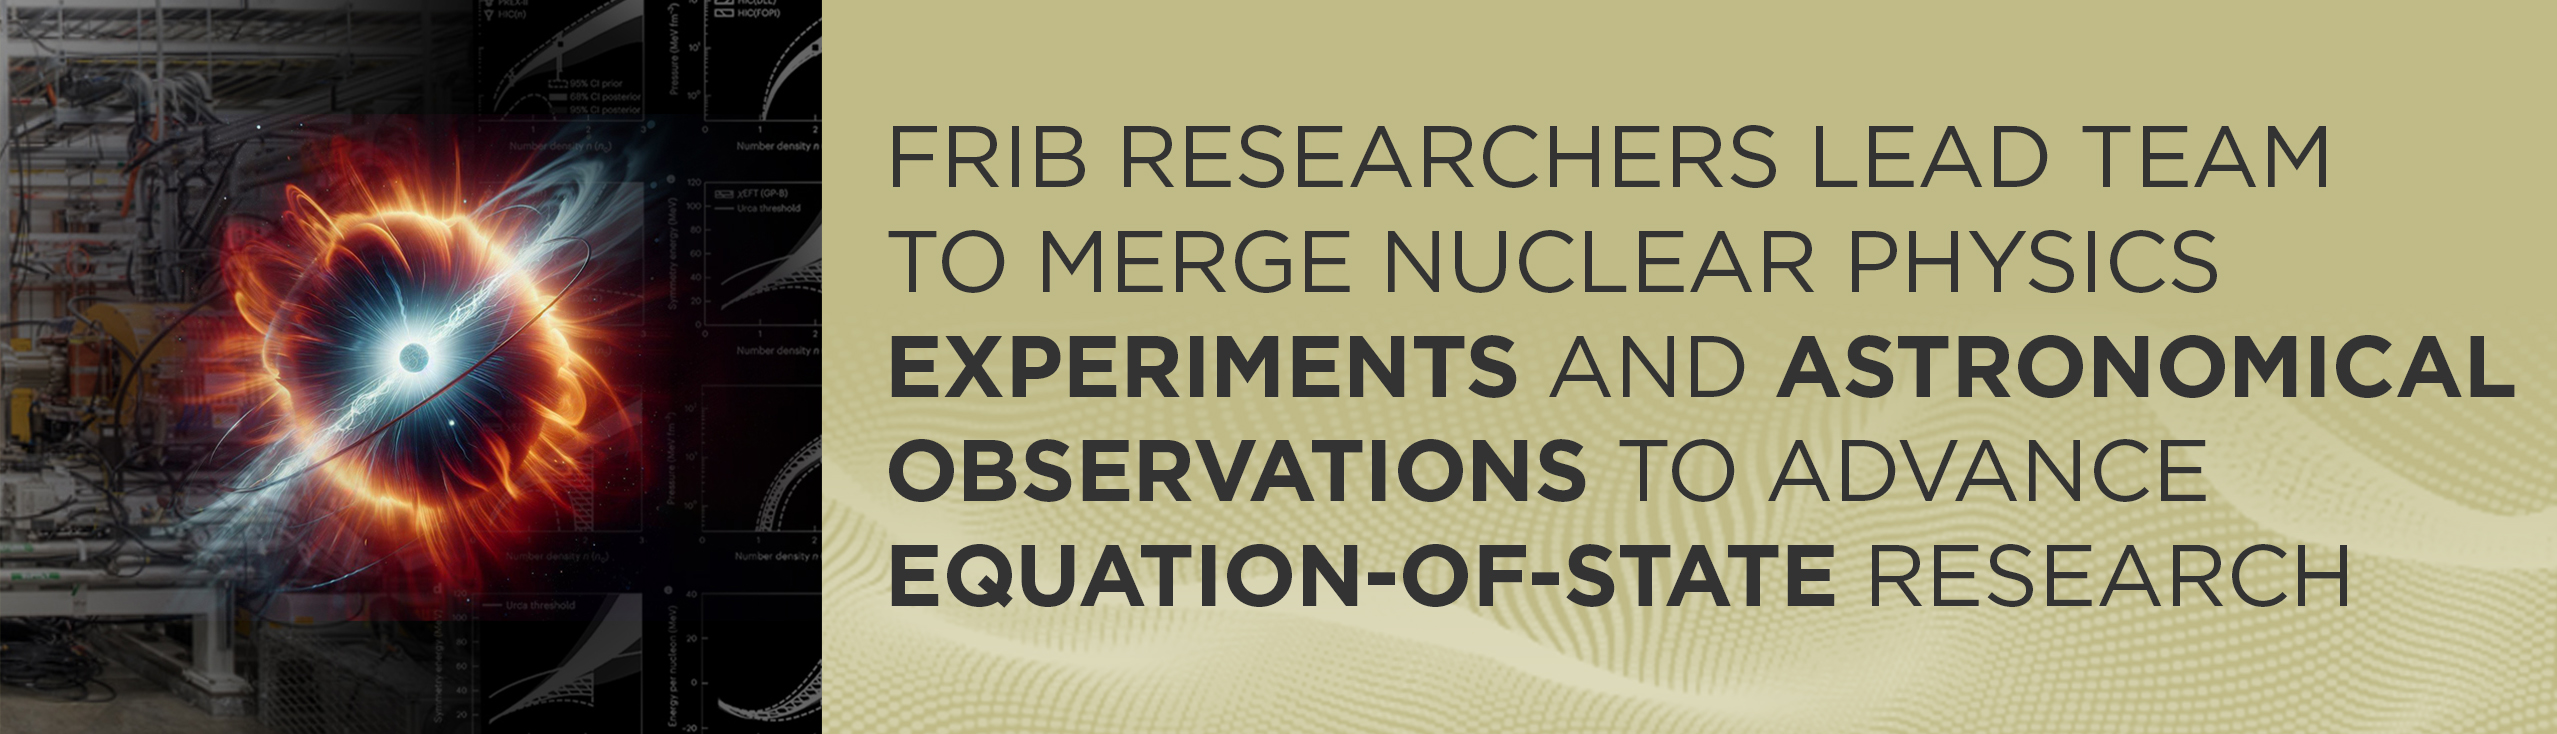 Graphic of neutron star with text that says "FRIB researchers lead team to merge nuclear physics experiments and astronomical observations to advance equation-of-state research"